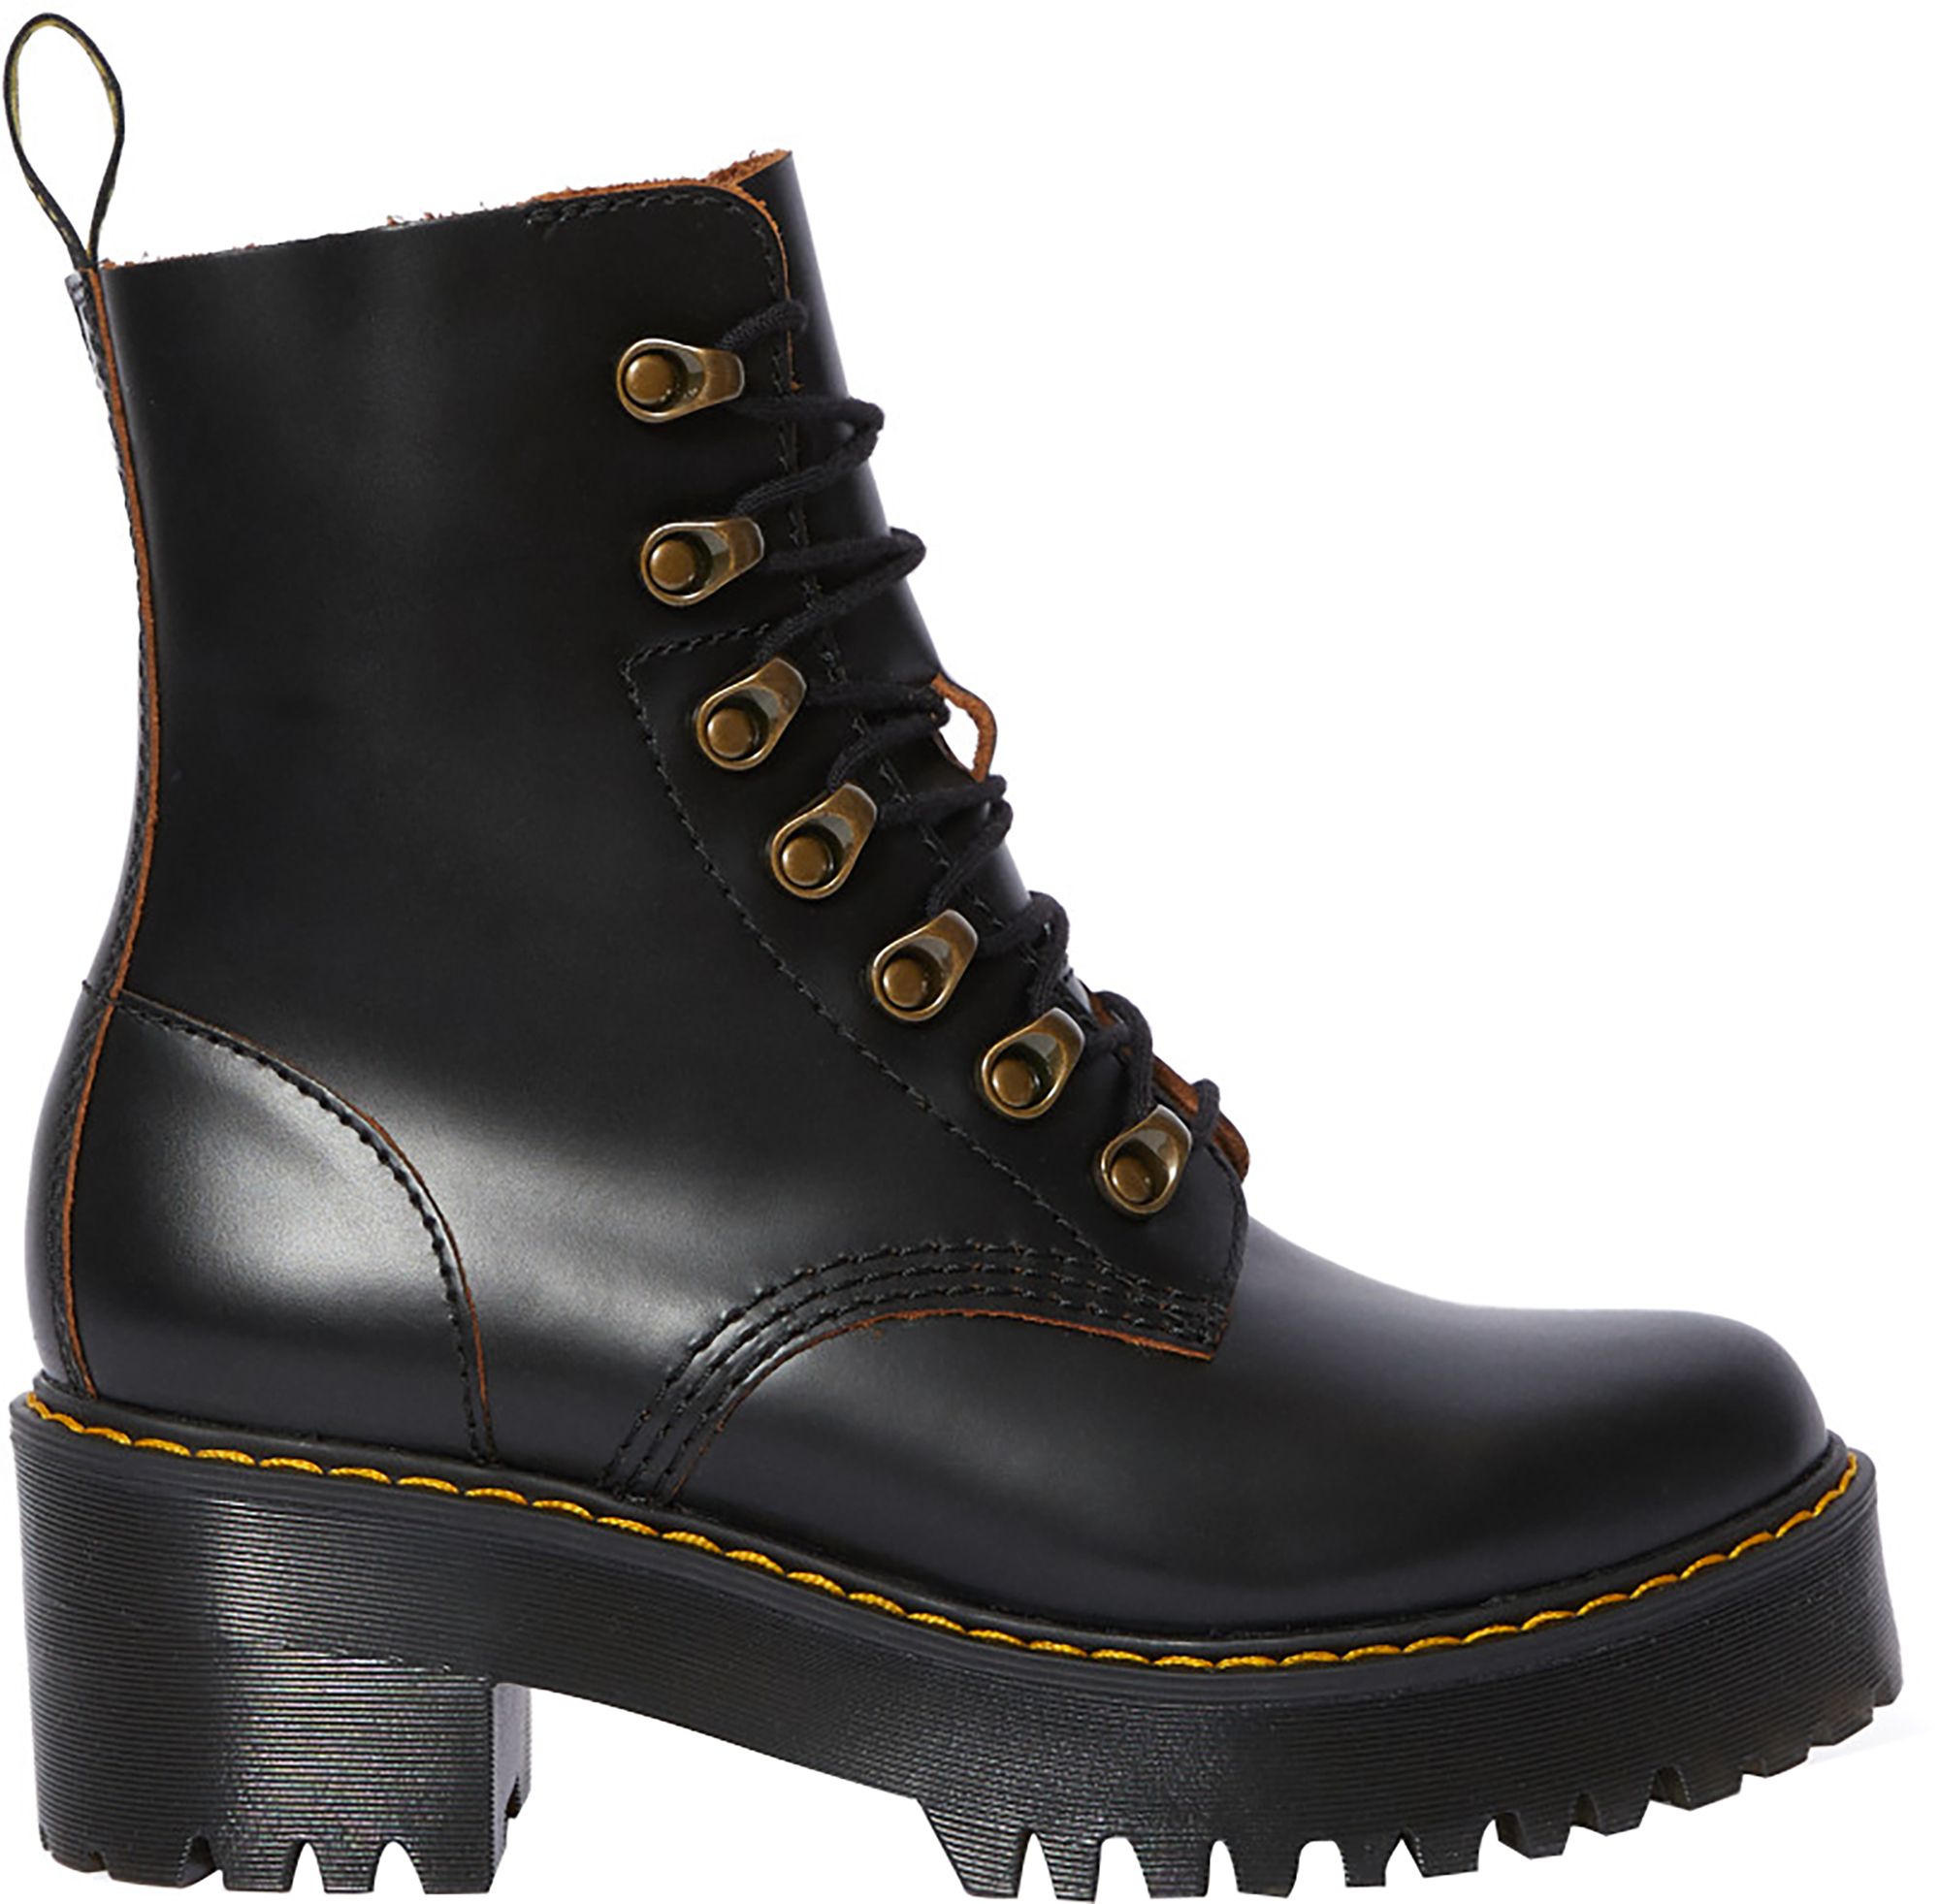 Dr. Martens Women's Leona Vintage Smooth Leather Heeled Boots